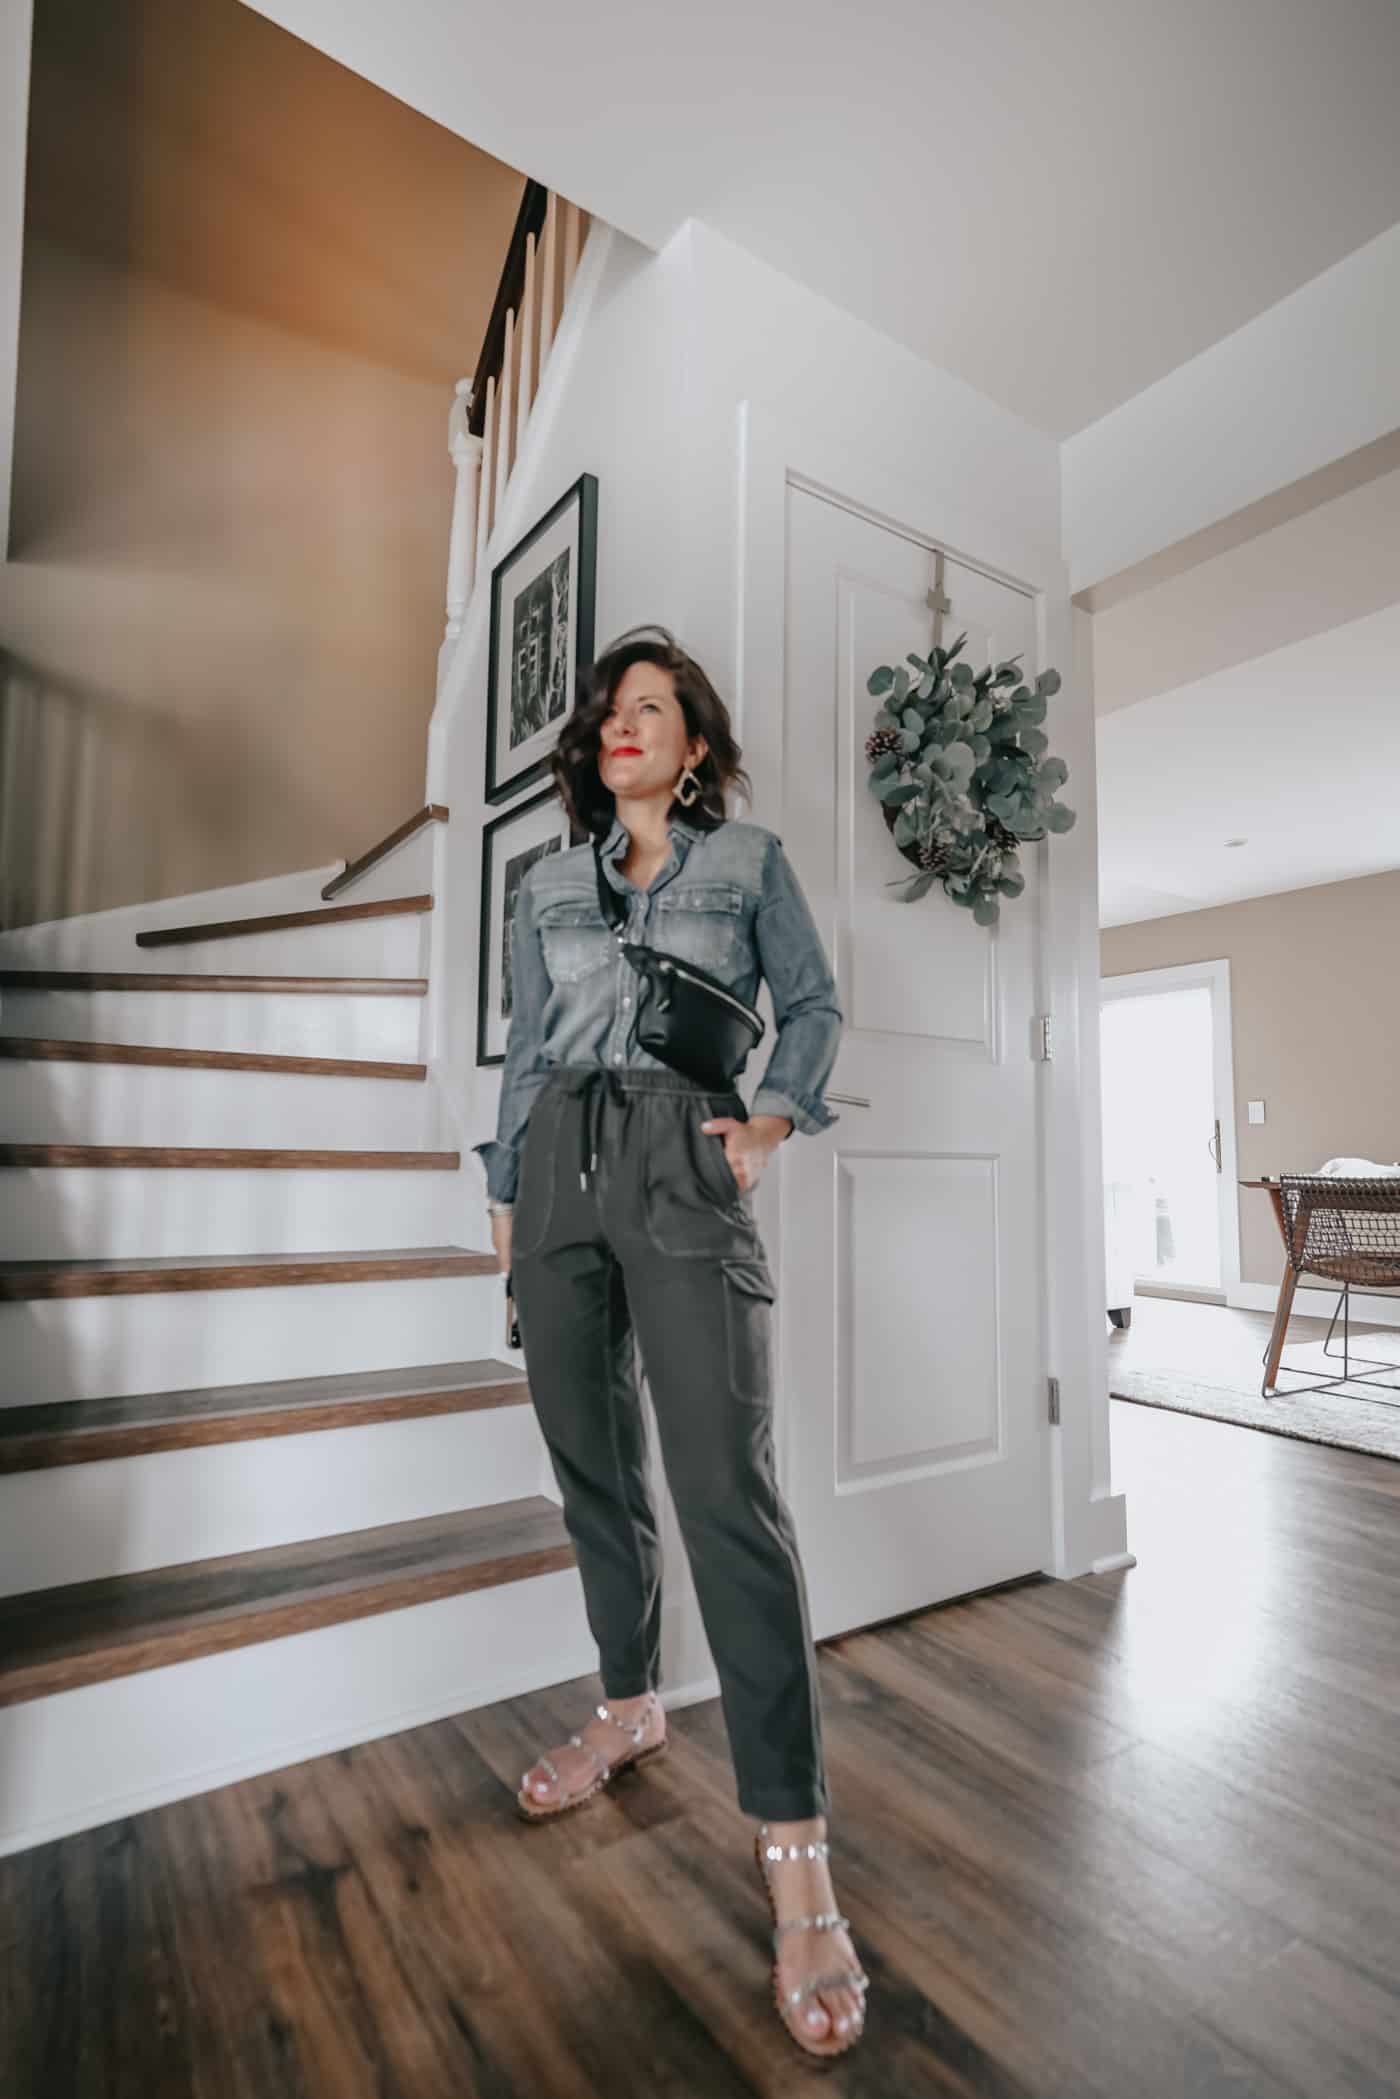 OLIVE CARGO PANTS OUTFITS FOR WOMEN - How cute are these olive cargo pants?  I hope you love them as much as we do!  Today, we're sharing 6 really cargo pant outfit ideas. These are the perfect spring and summer outfits.  All 6 looks are perfect for now and later!  #cargopants #olivecargopants #summeroutfits #casualoutfits 